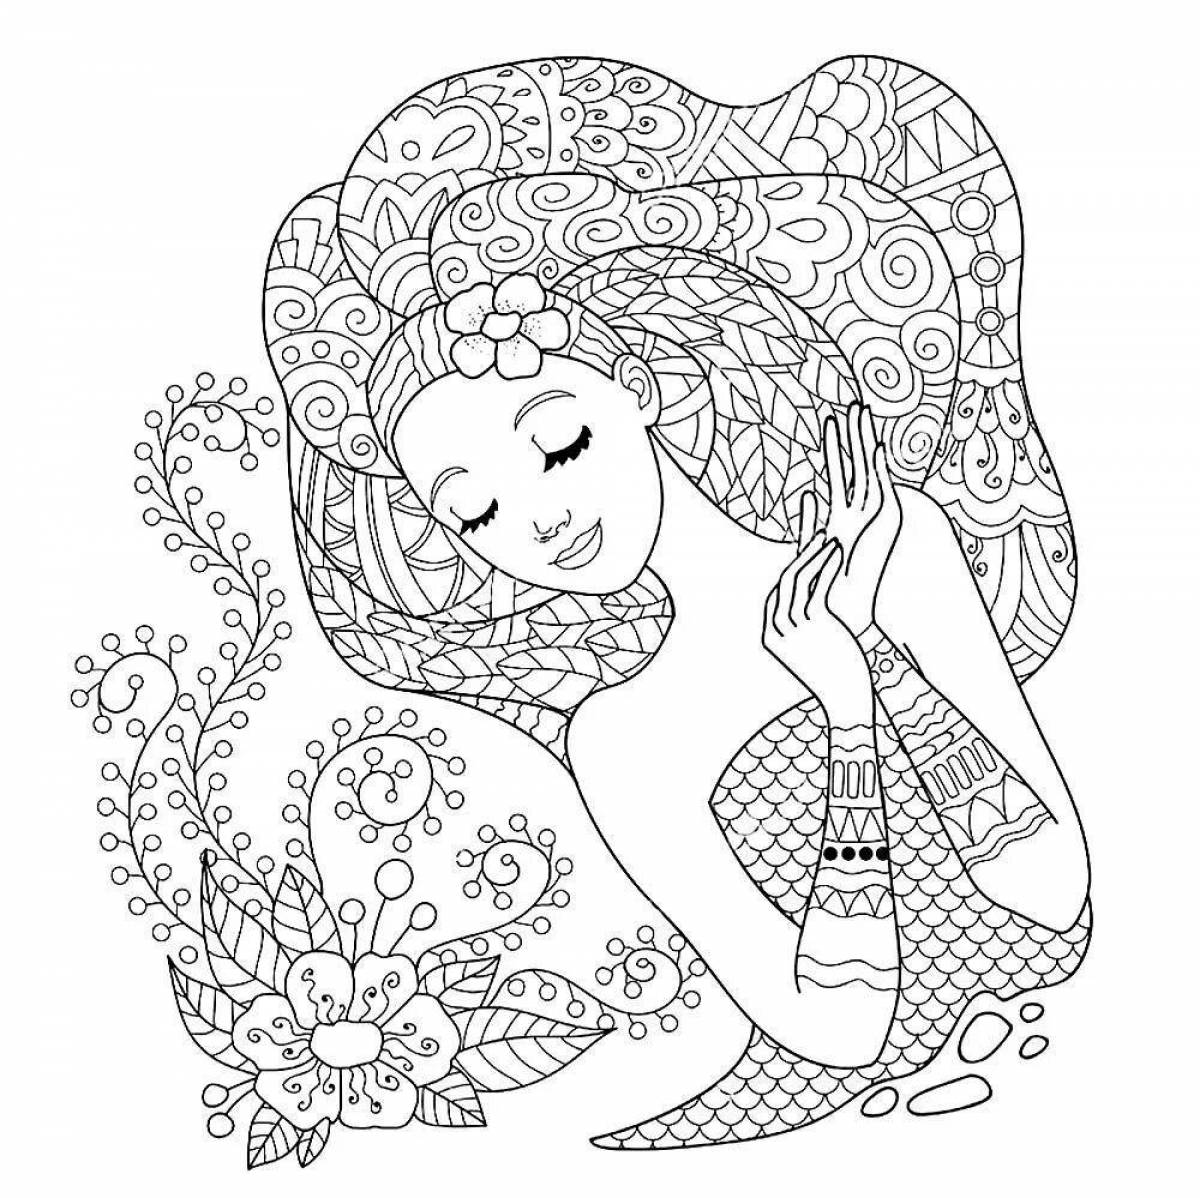 Amazing coloring pages for girls 7 years old